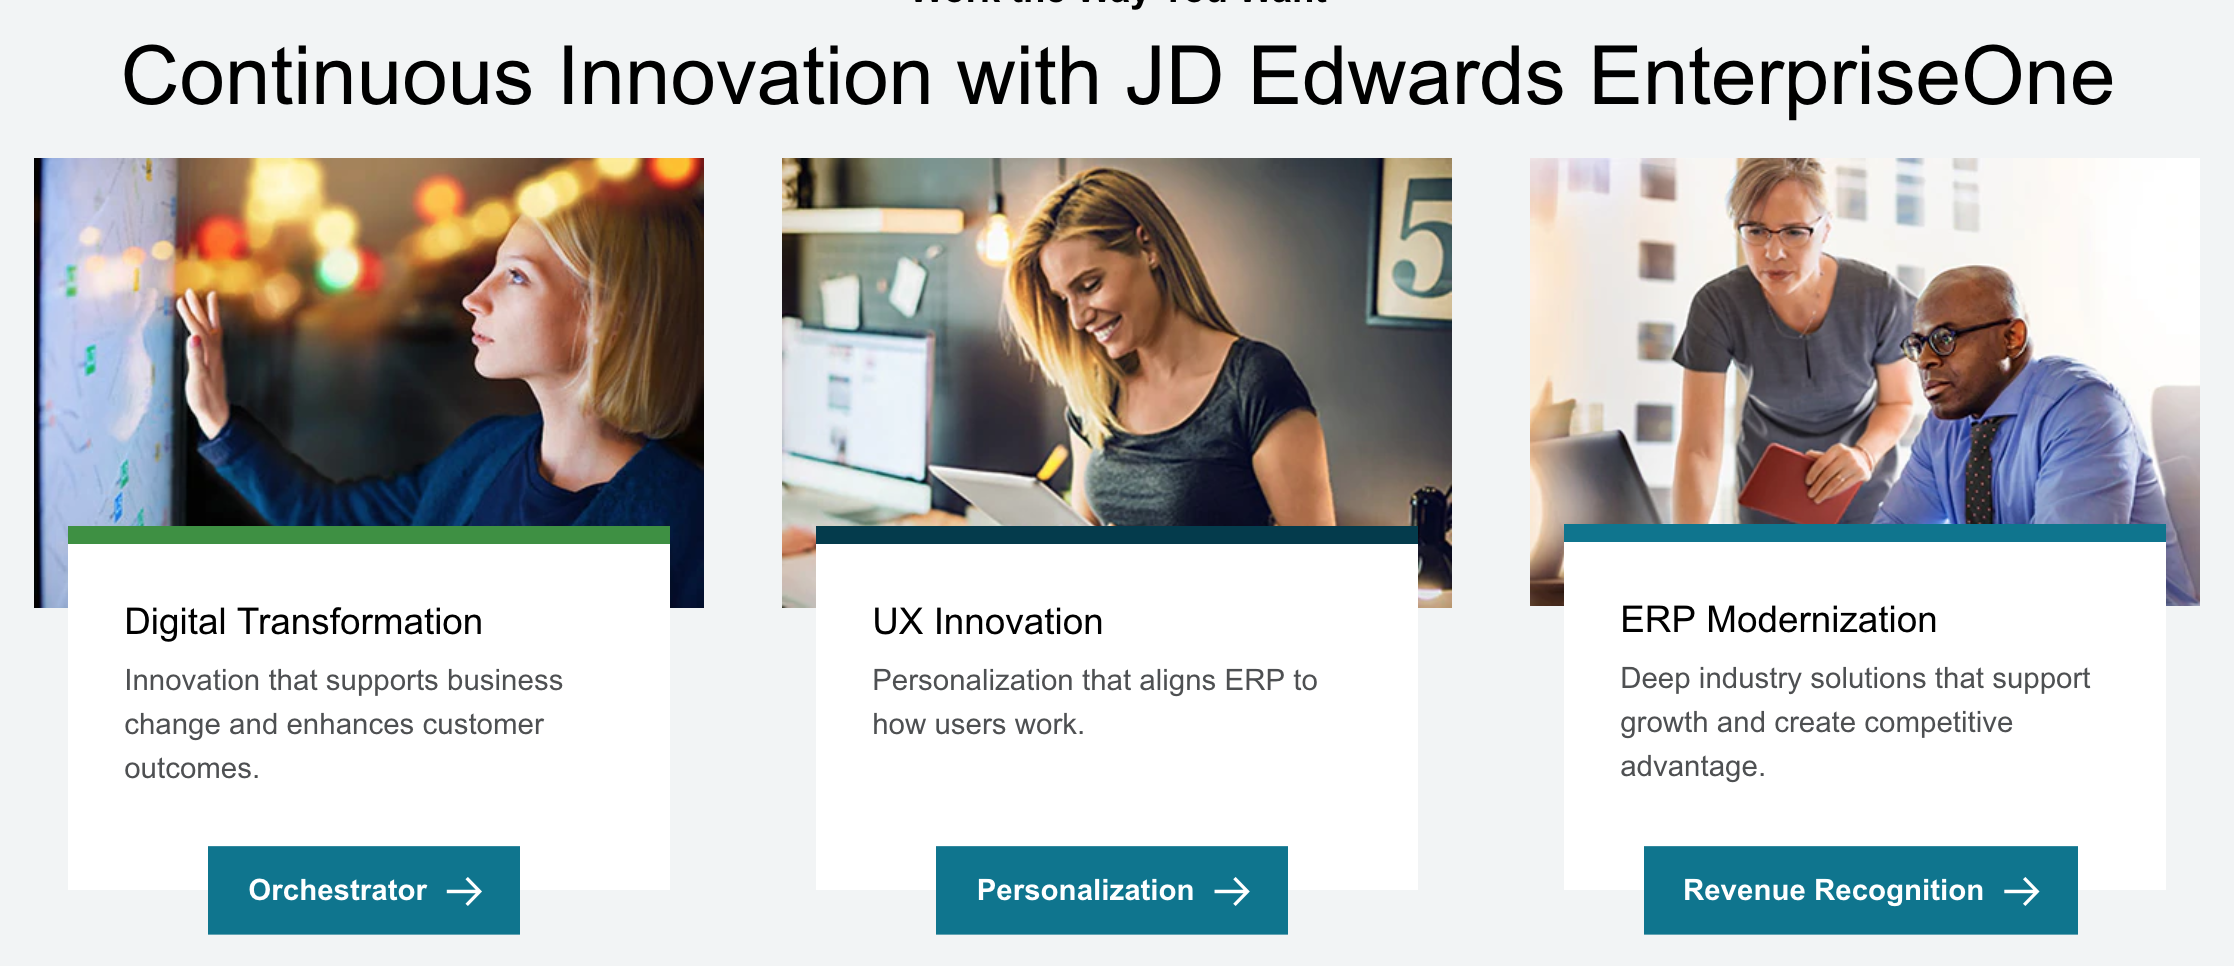 JD Edwards EnterpriseOne has a supports service-oriented architecture, making it very helpful in deriving business value from Oracle Fusion Middleware.